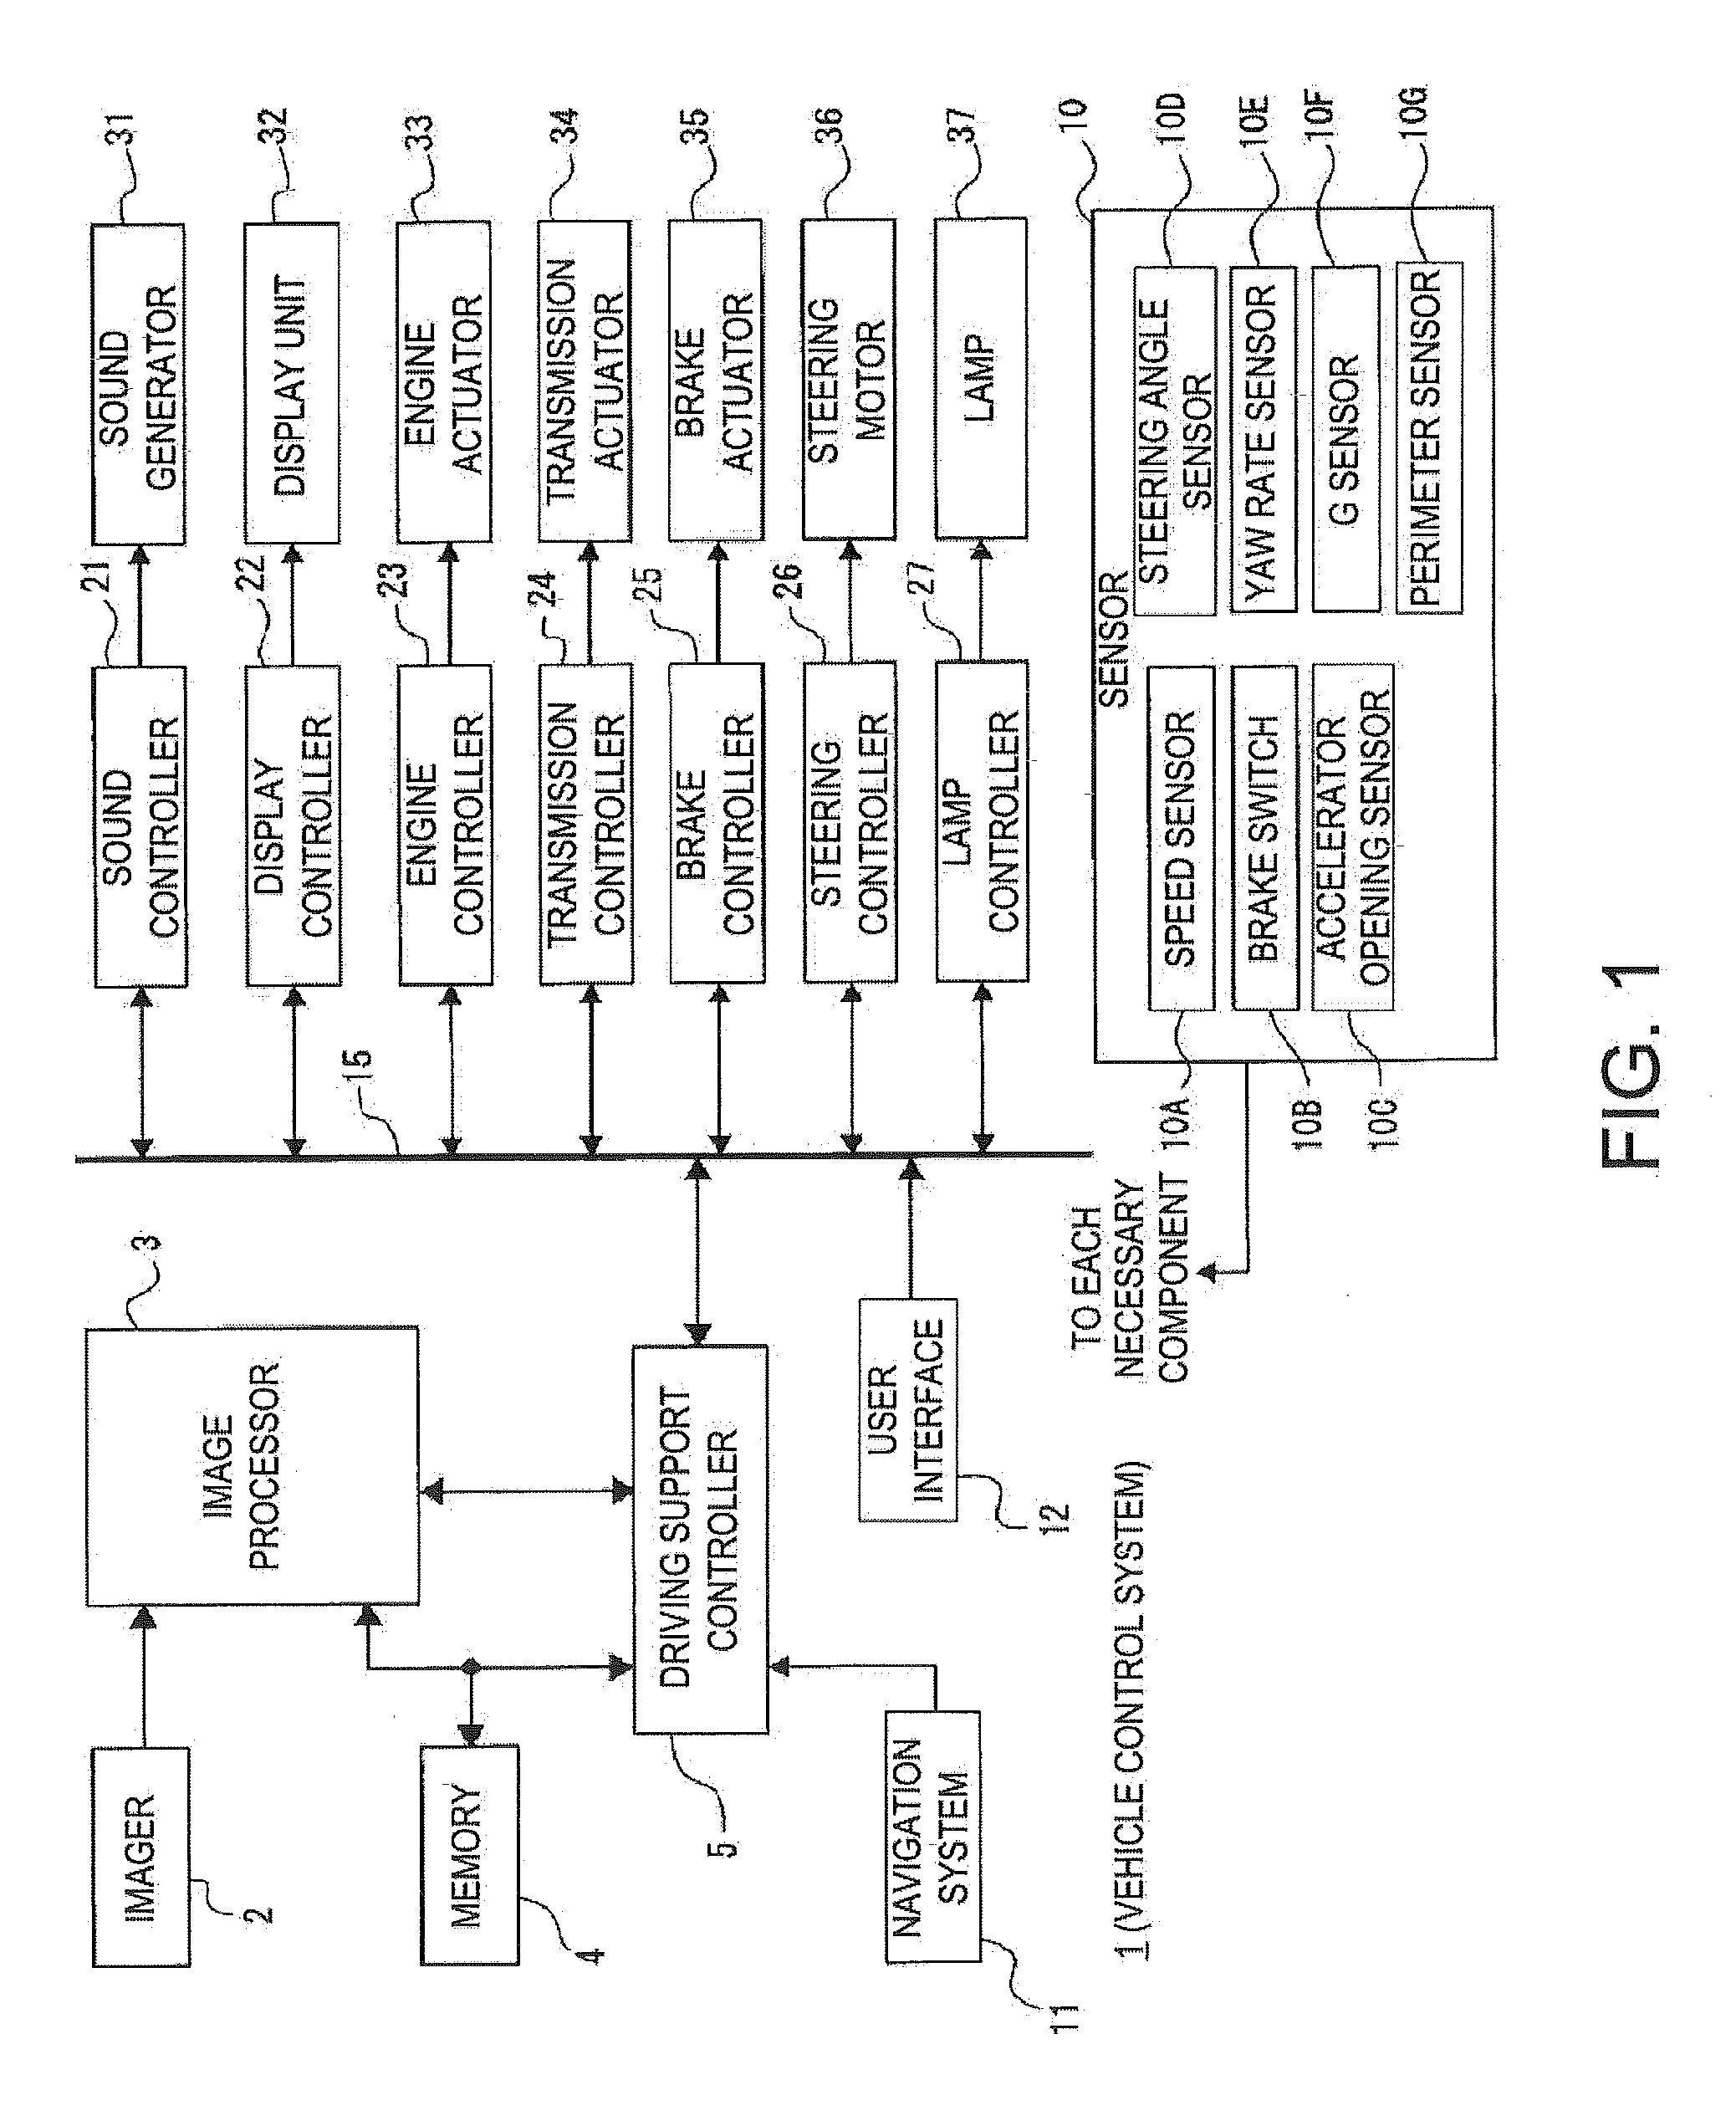 Driving support controller